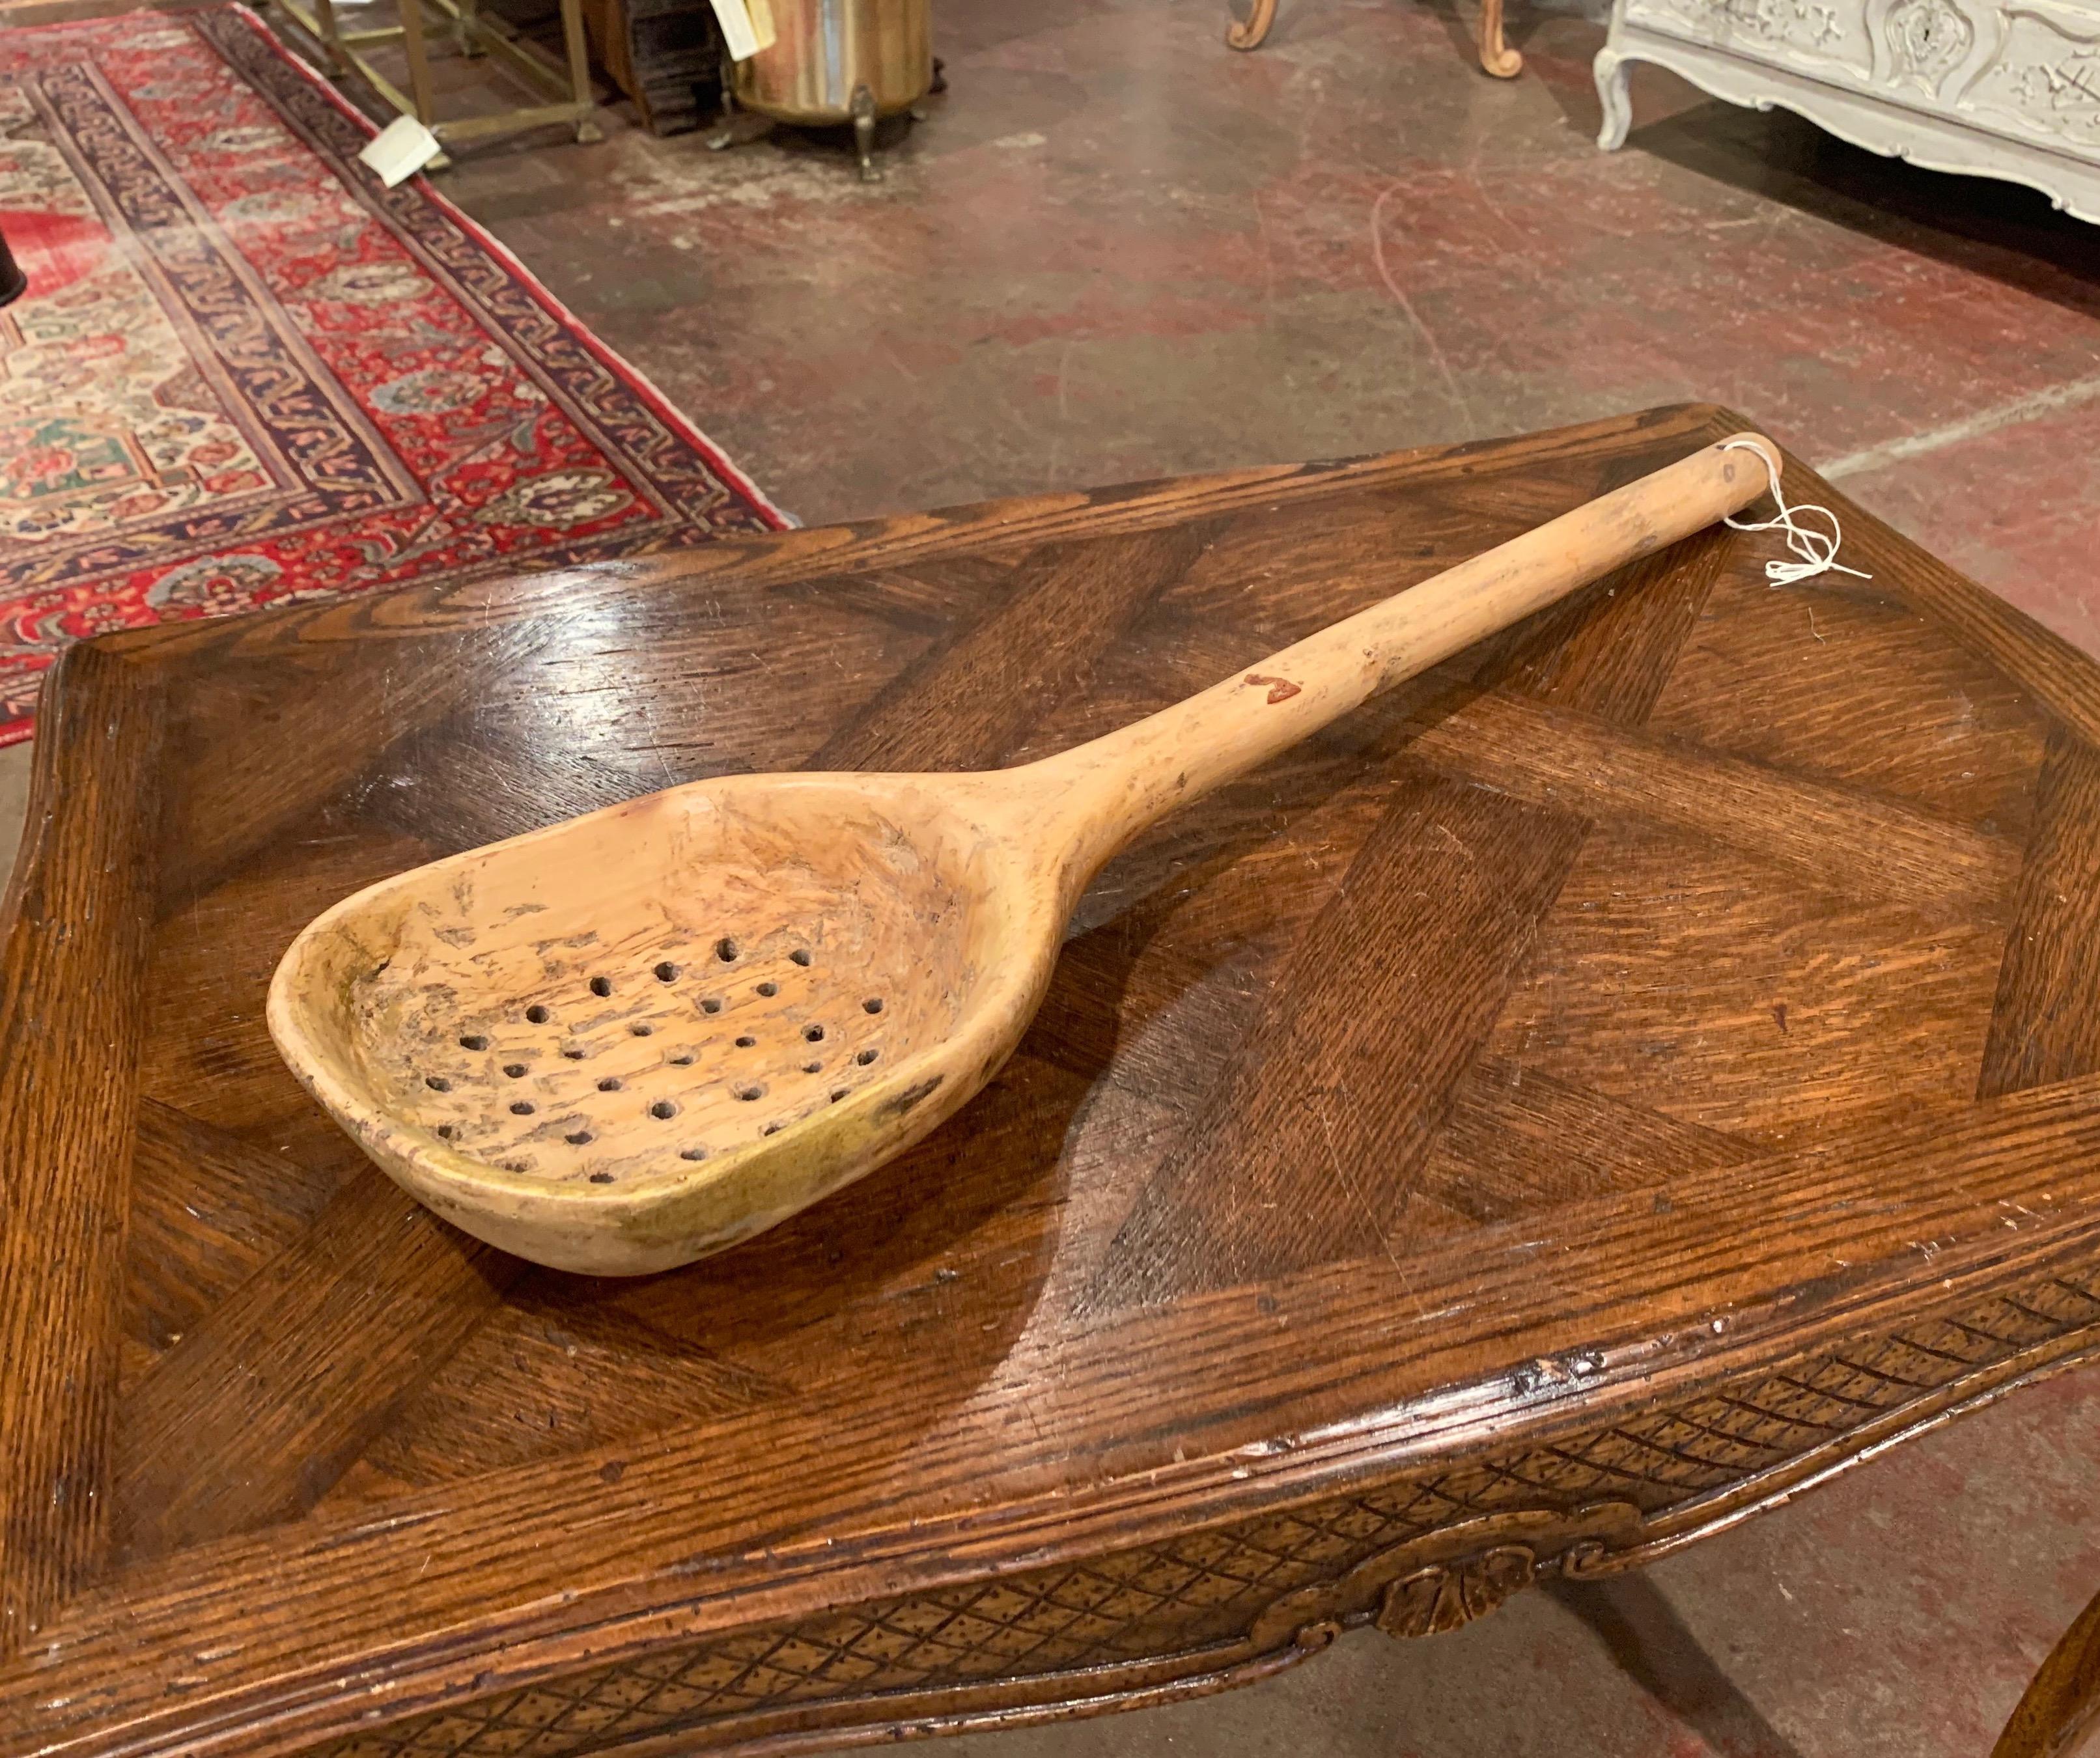 Hand-Carved 19th Century French Decorative Carved Walnut Spoon For Sale